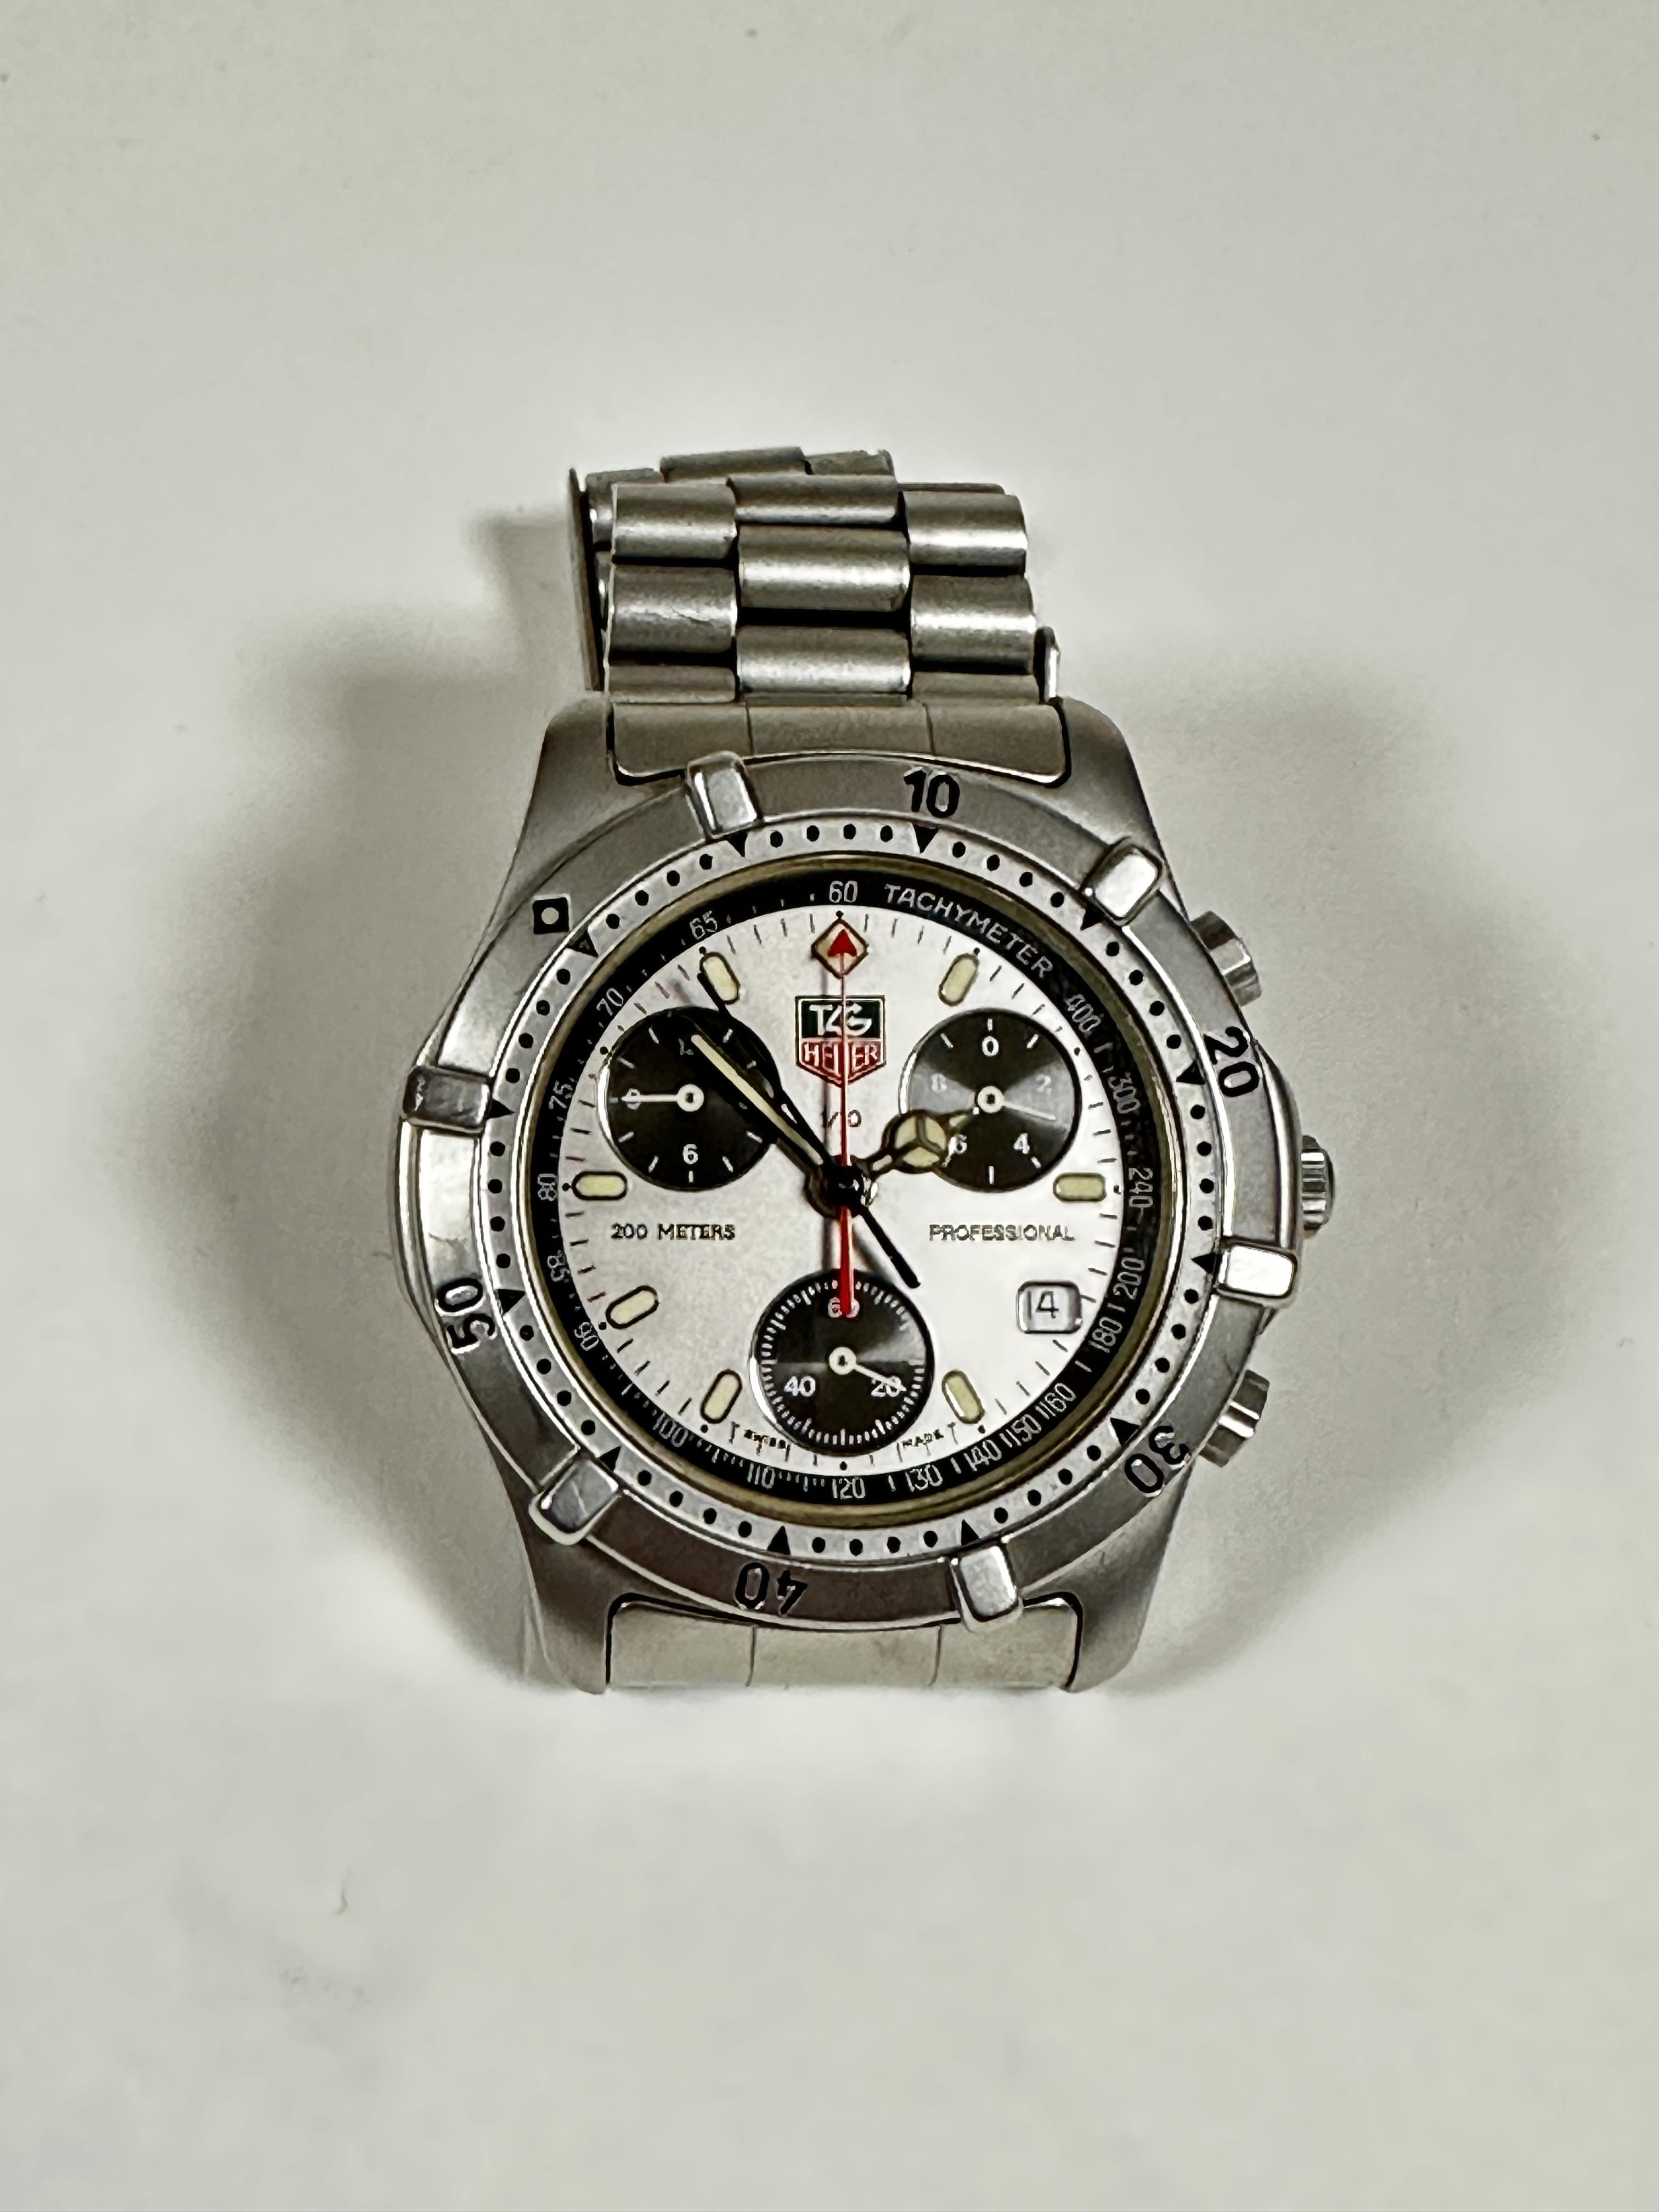 A gentleman's Tag Heure chronograph stainless steel sports wrist watch on stainless steel bracelet